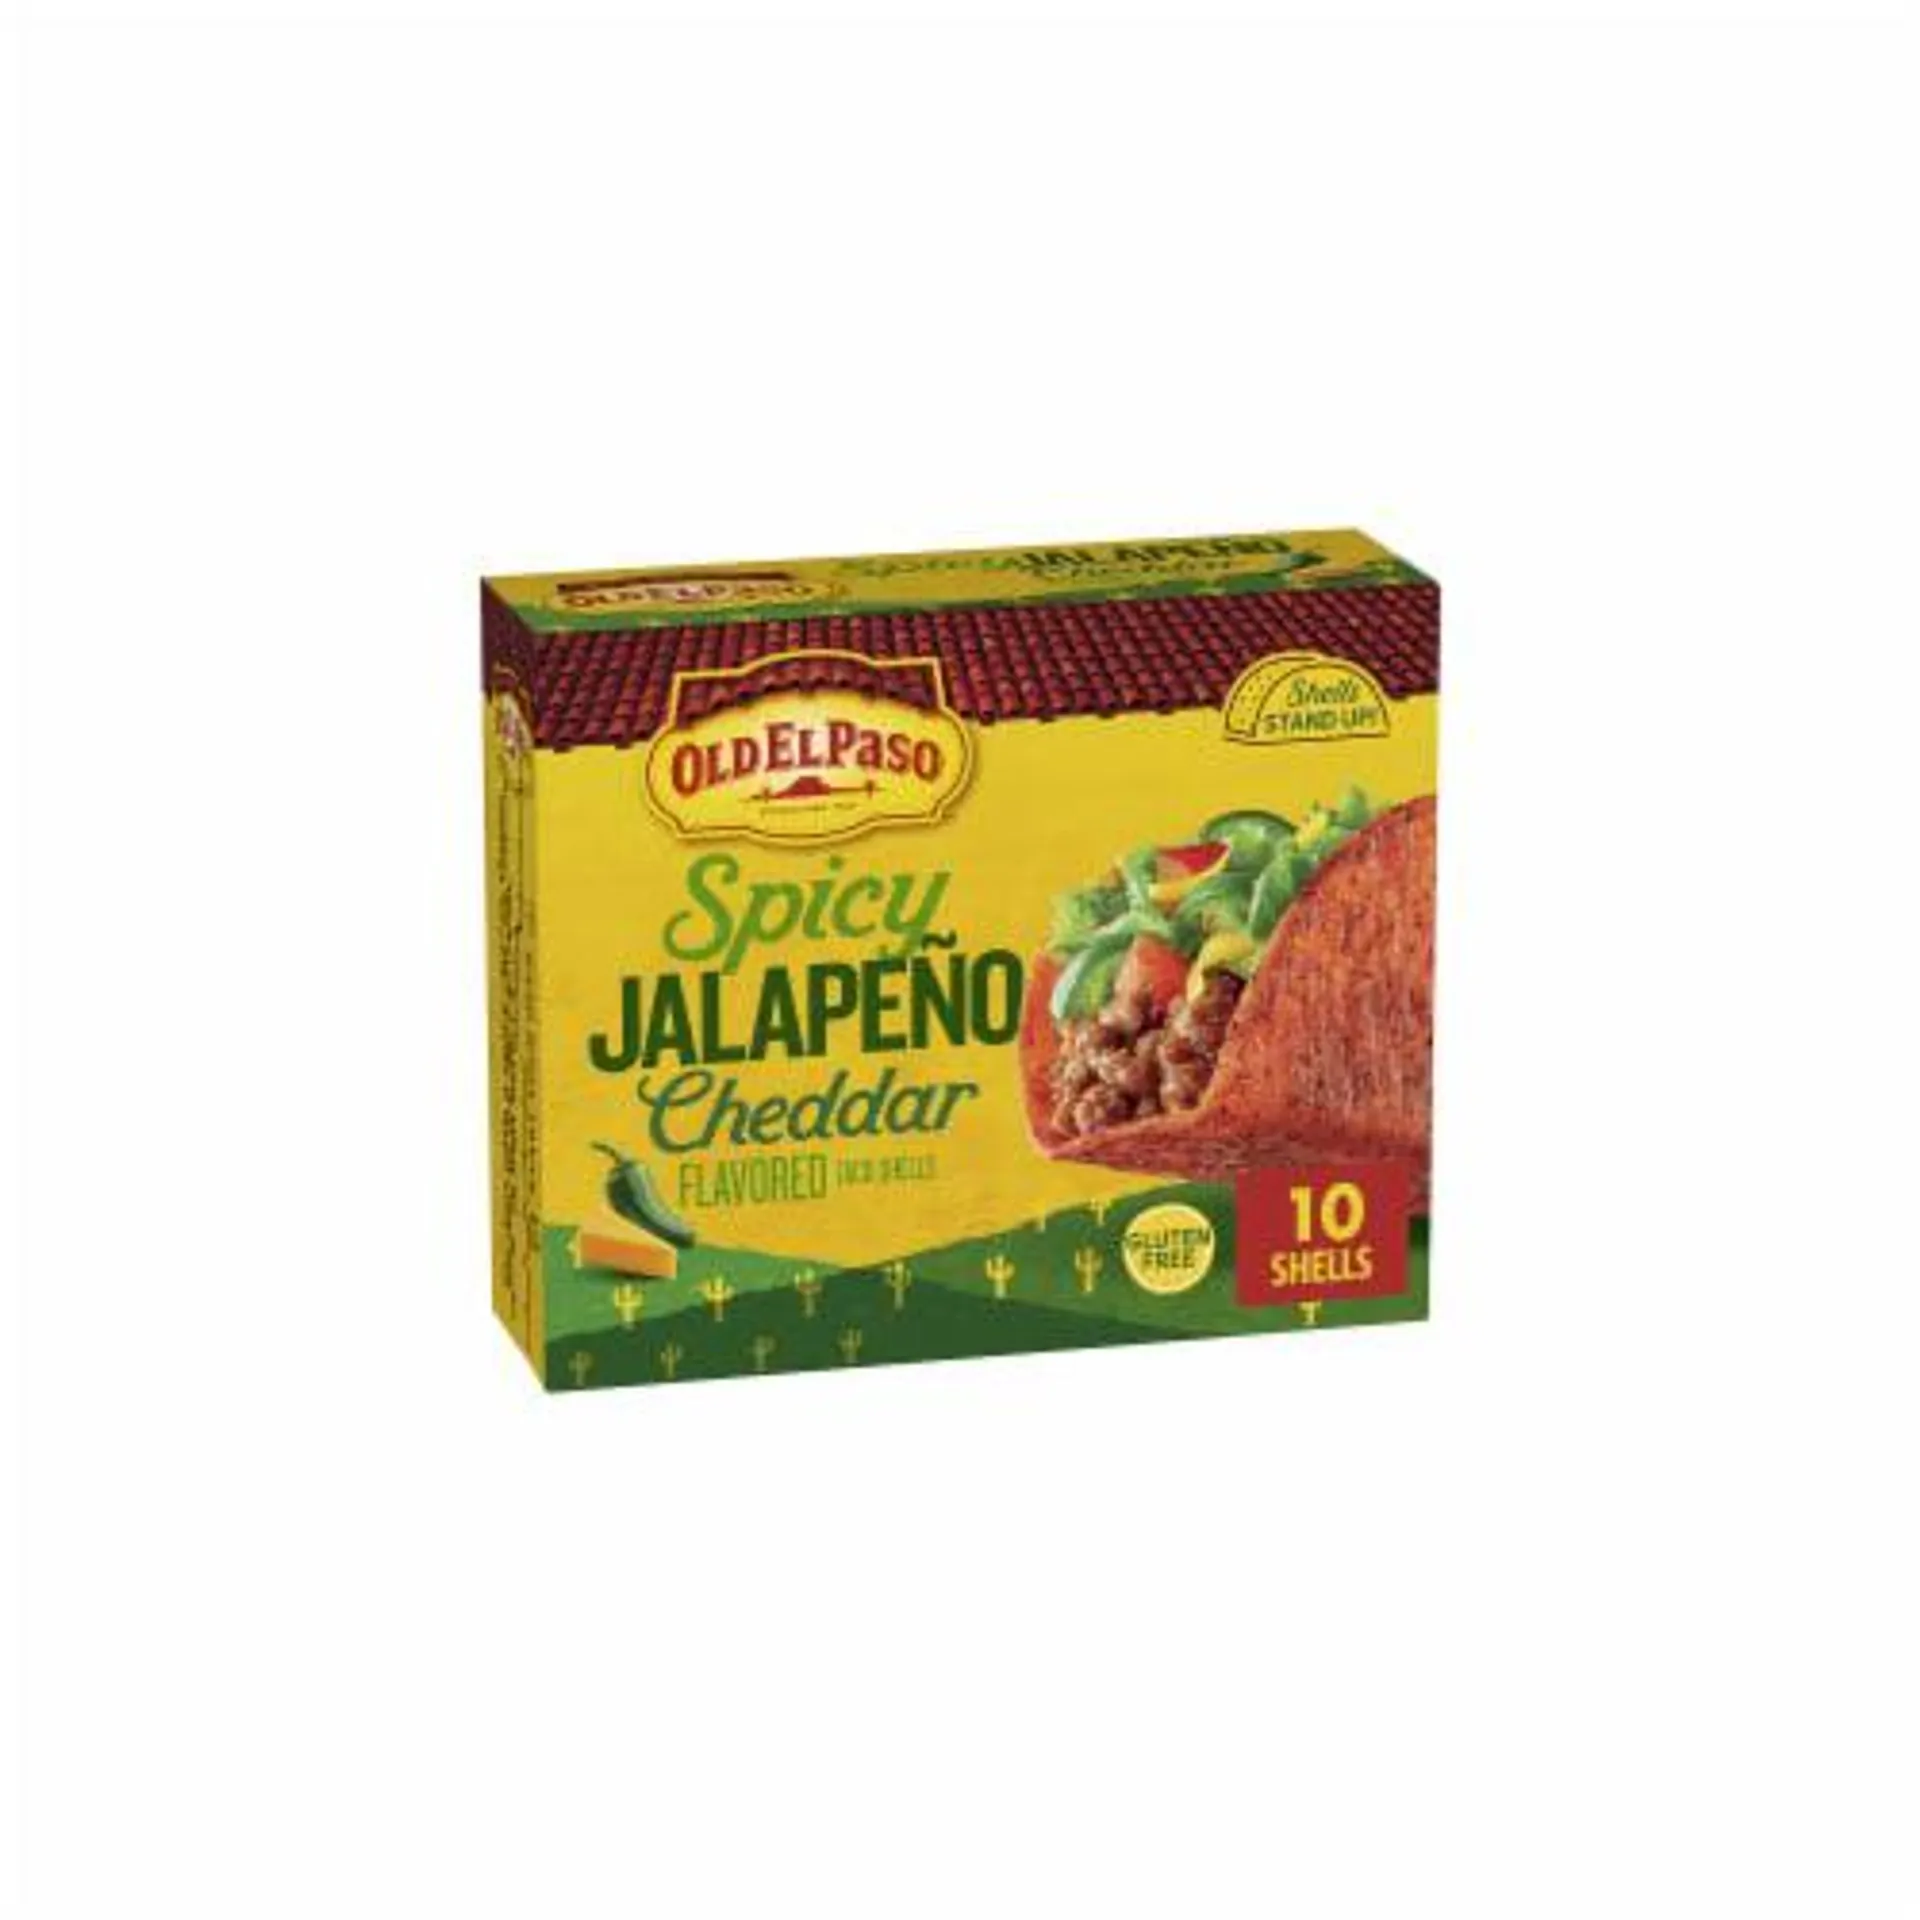 Old El Paso Spicy Jalapeño Cheddar Flavored Gluten Free (Pack of 8)